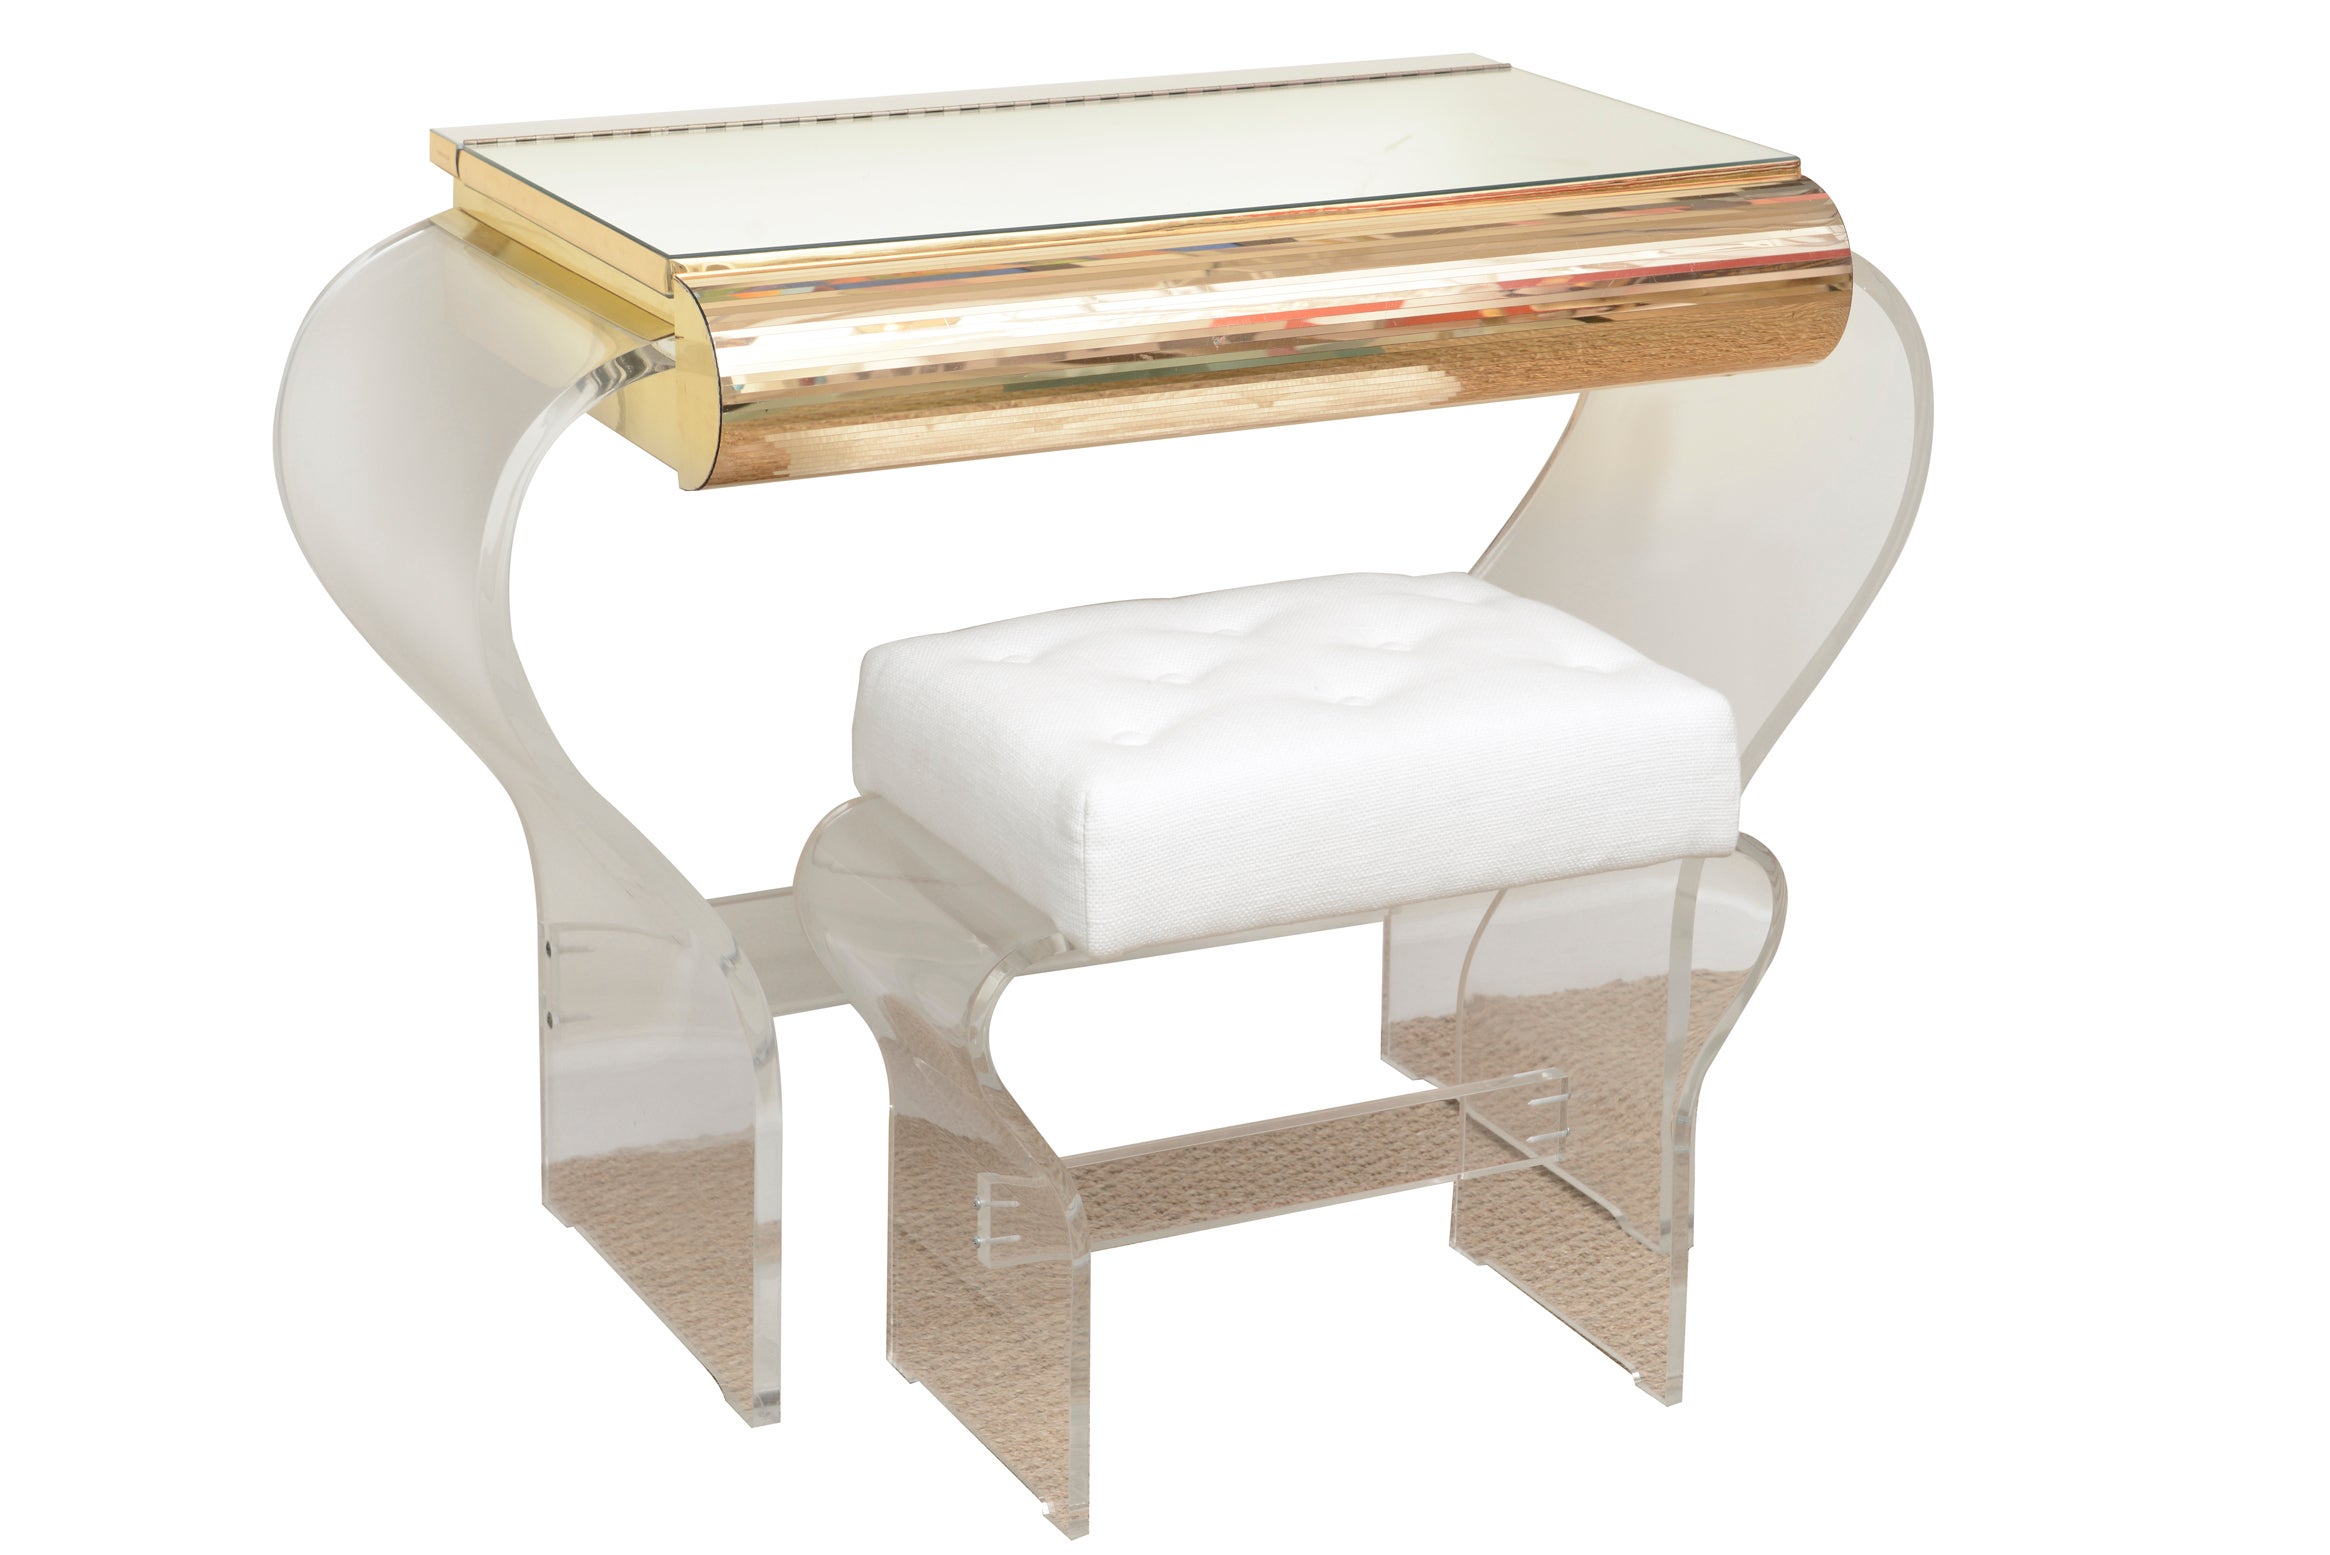 Lucite and Mirrored Vanity with Upholstered Bench